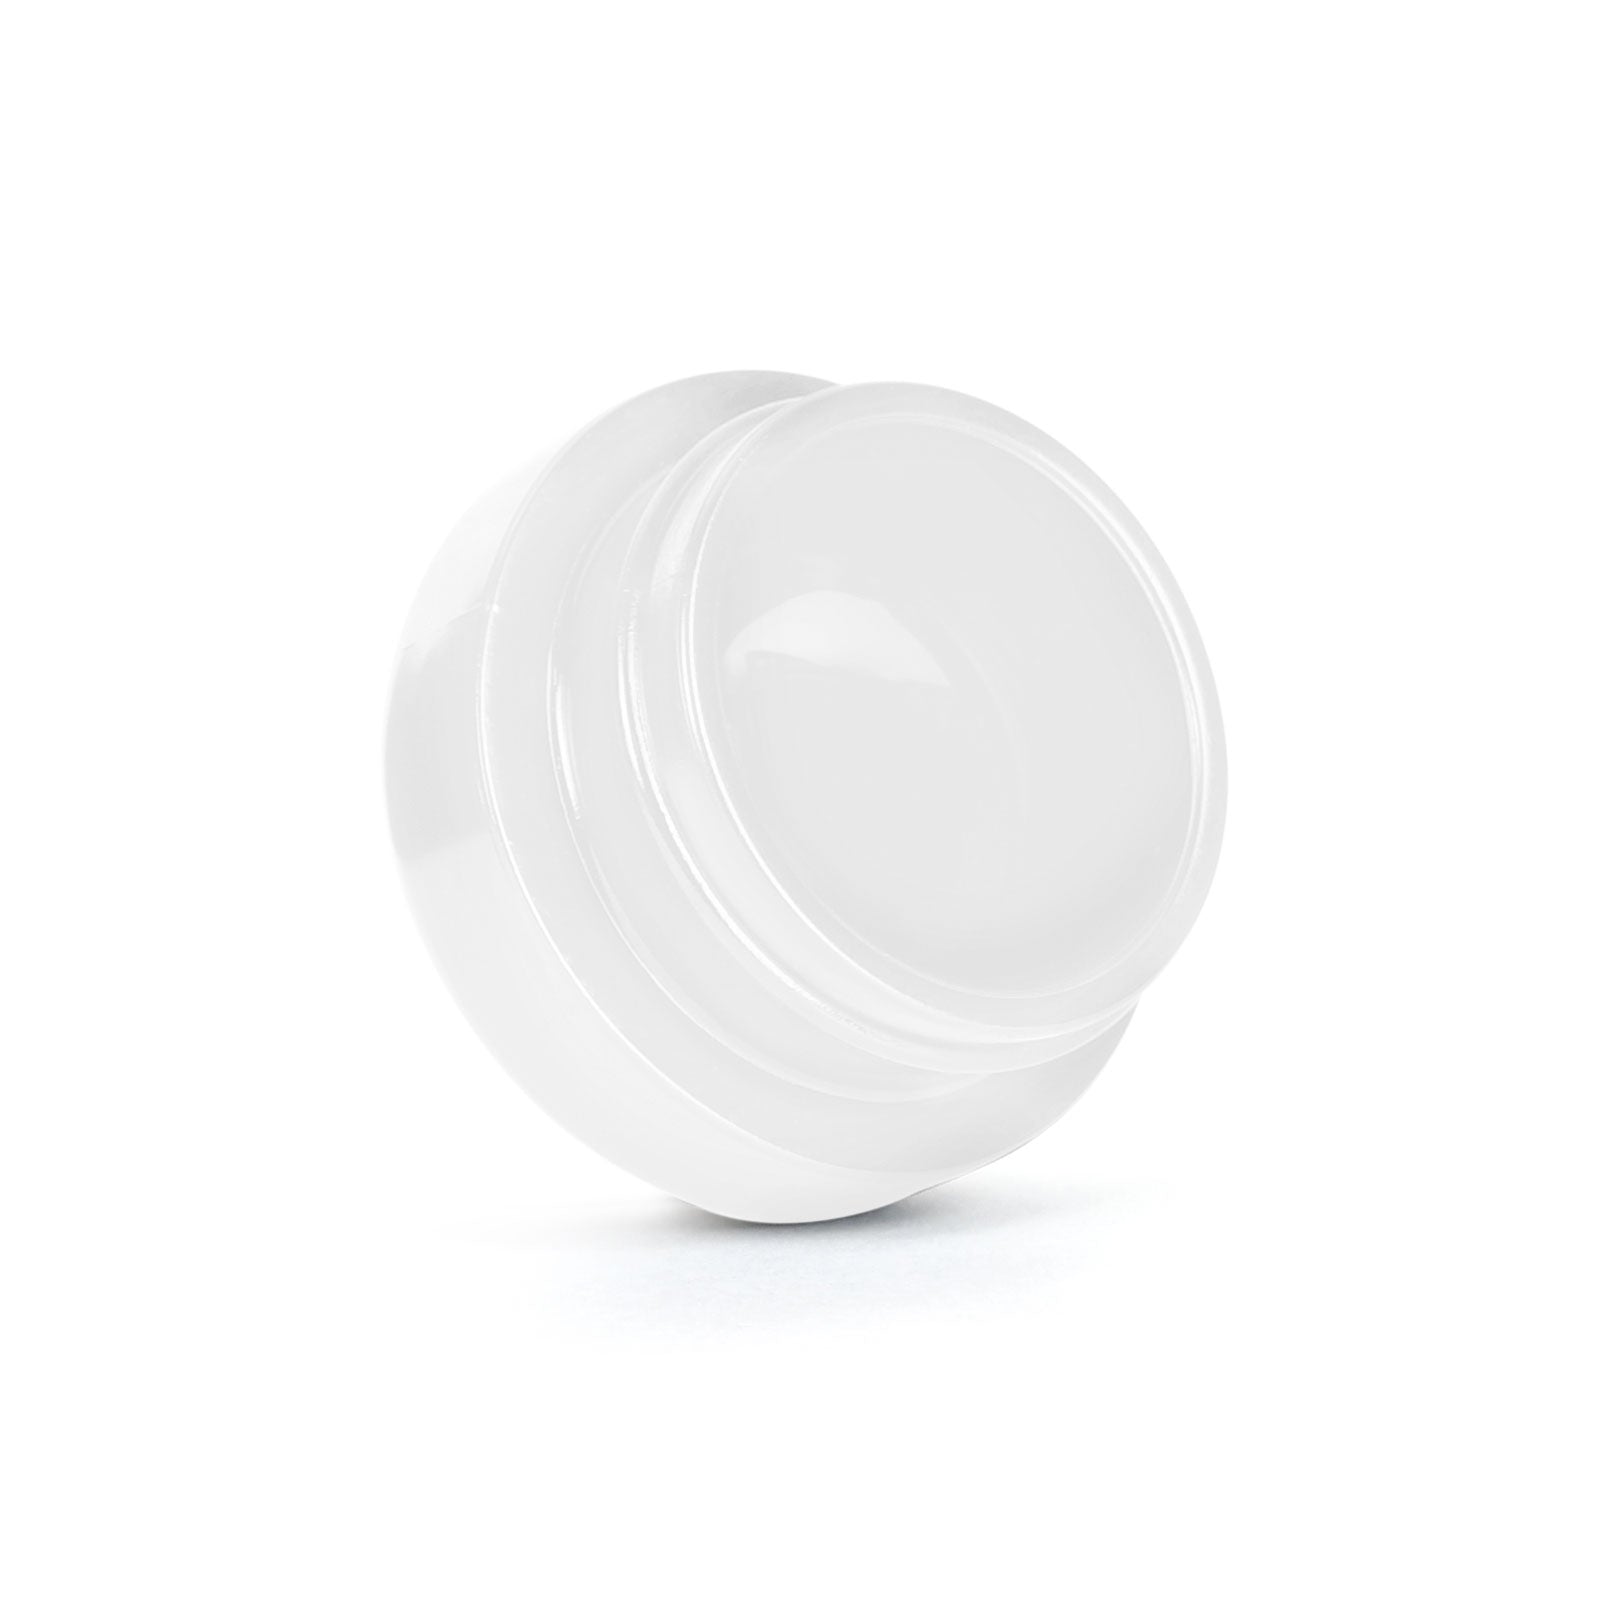 9ml Child Resistant White Glass Jar With White Cap - 2 Gram - 1 Count